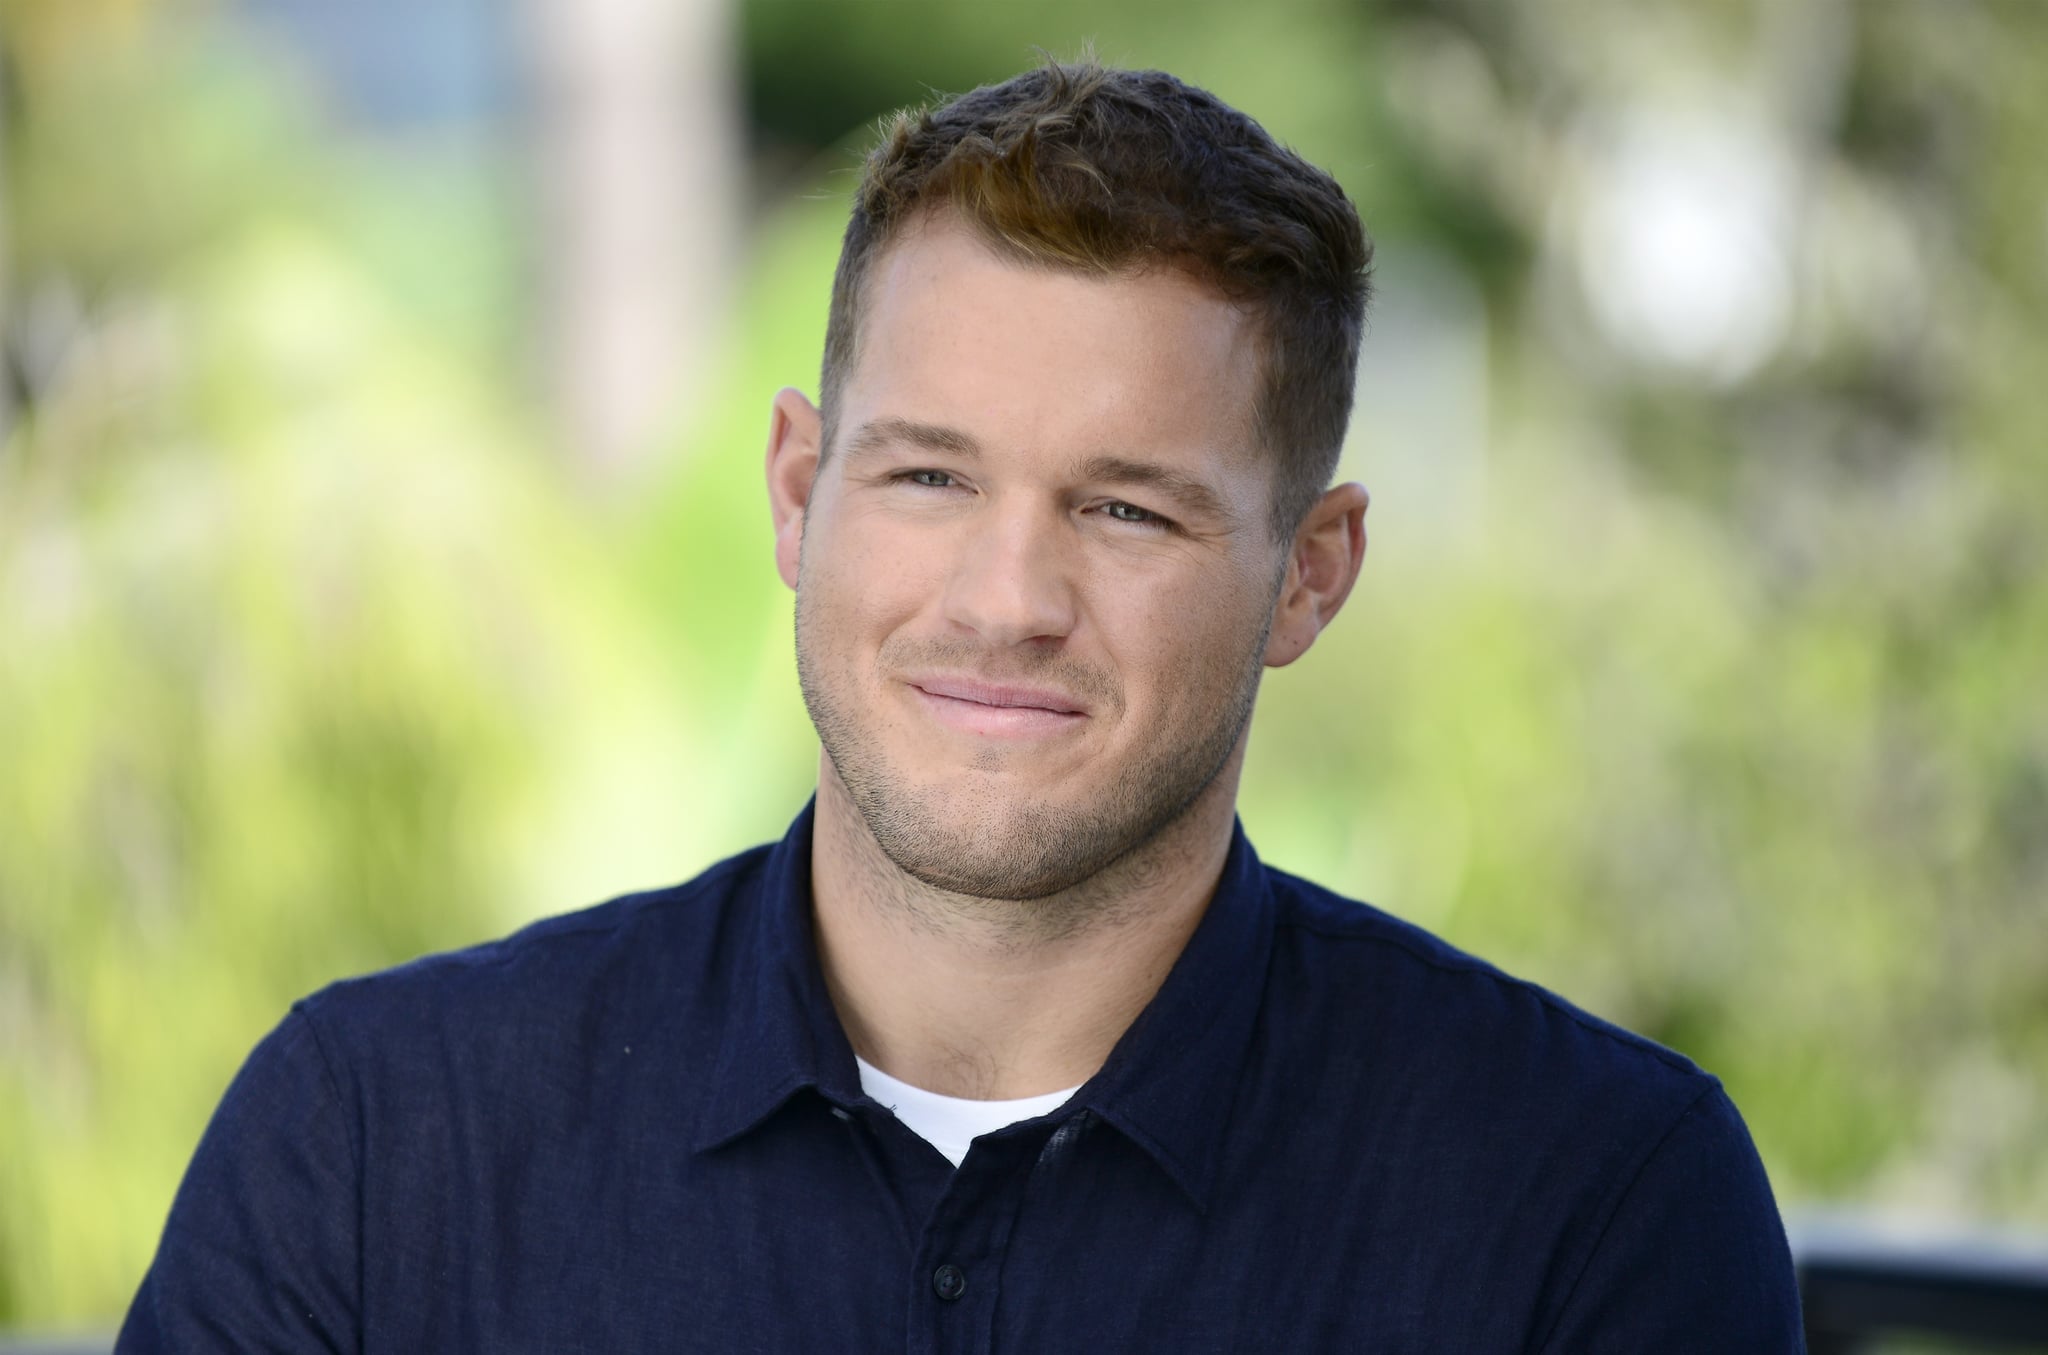 MAR VISTA, CALIFORNIA - OCTOBER 08: Colton Underwood stars in a new ad campaign for Tubi, the worlds largest free movie and TV streaming service on October 08, 2019 in Mar Vista, California. (Photo by Jerod Harris/Getty Images for Tubi)